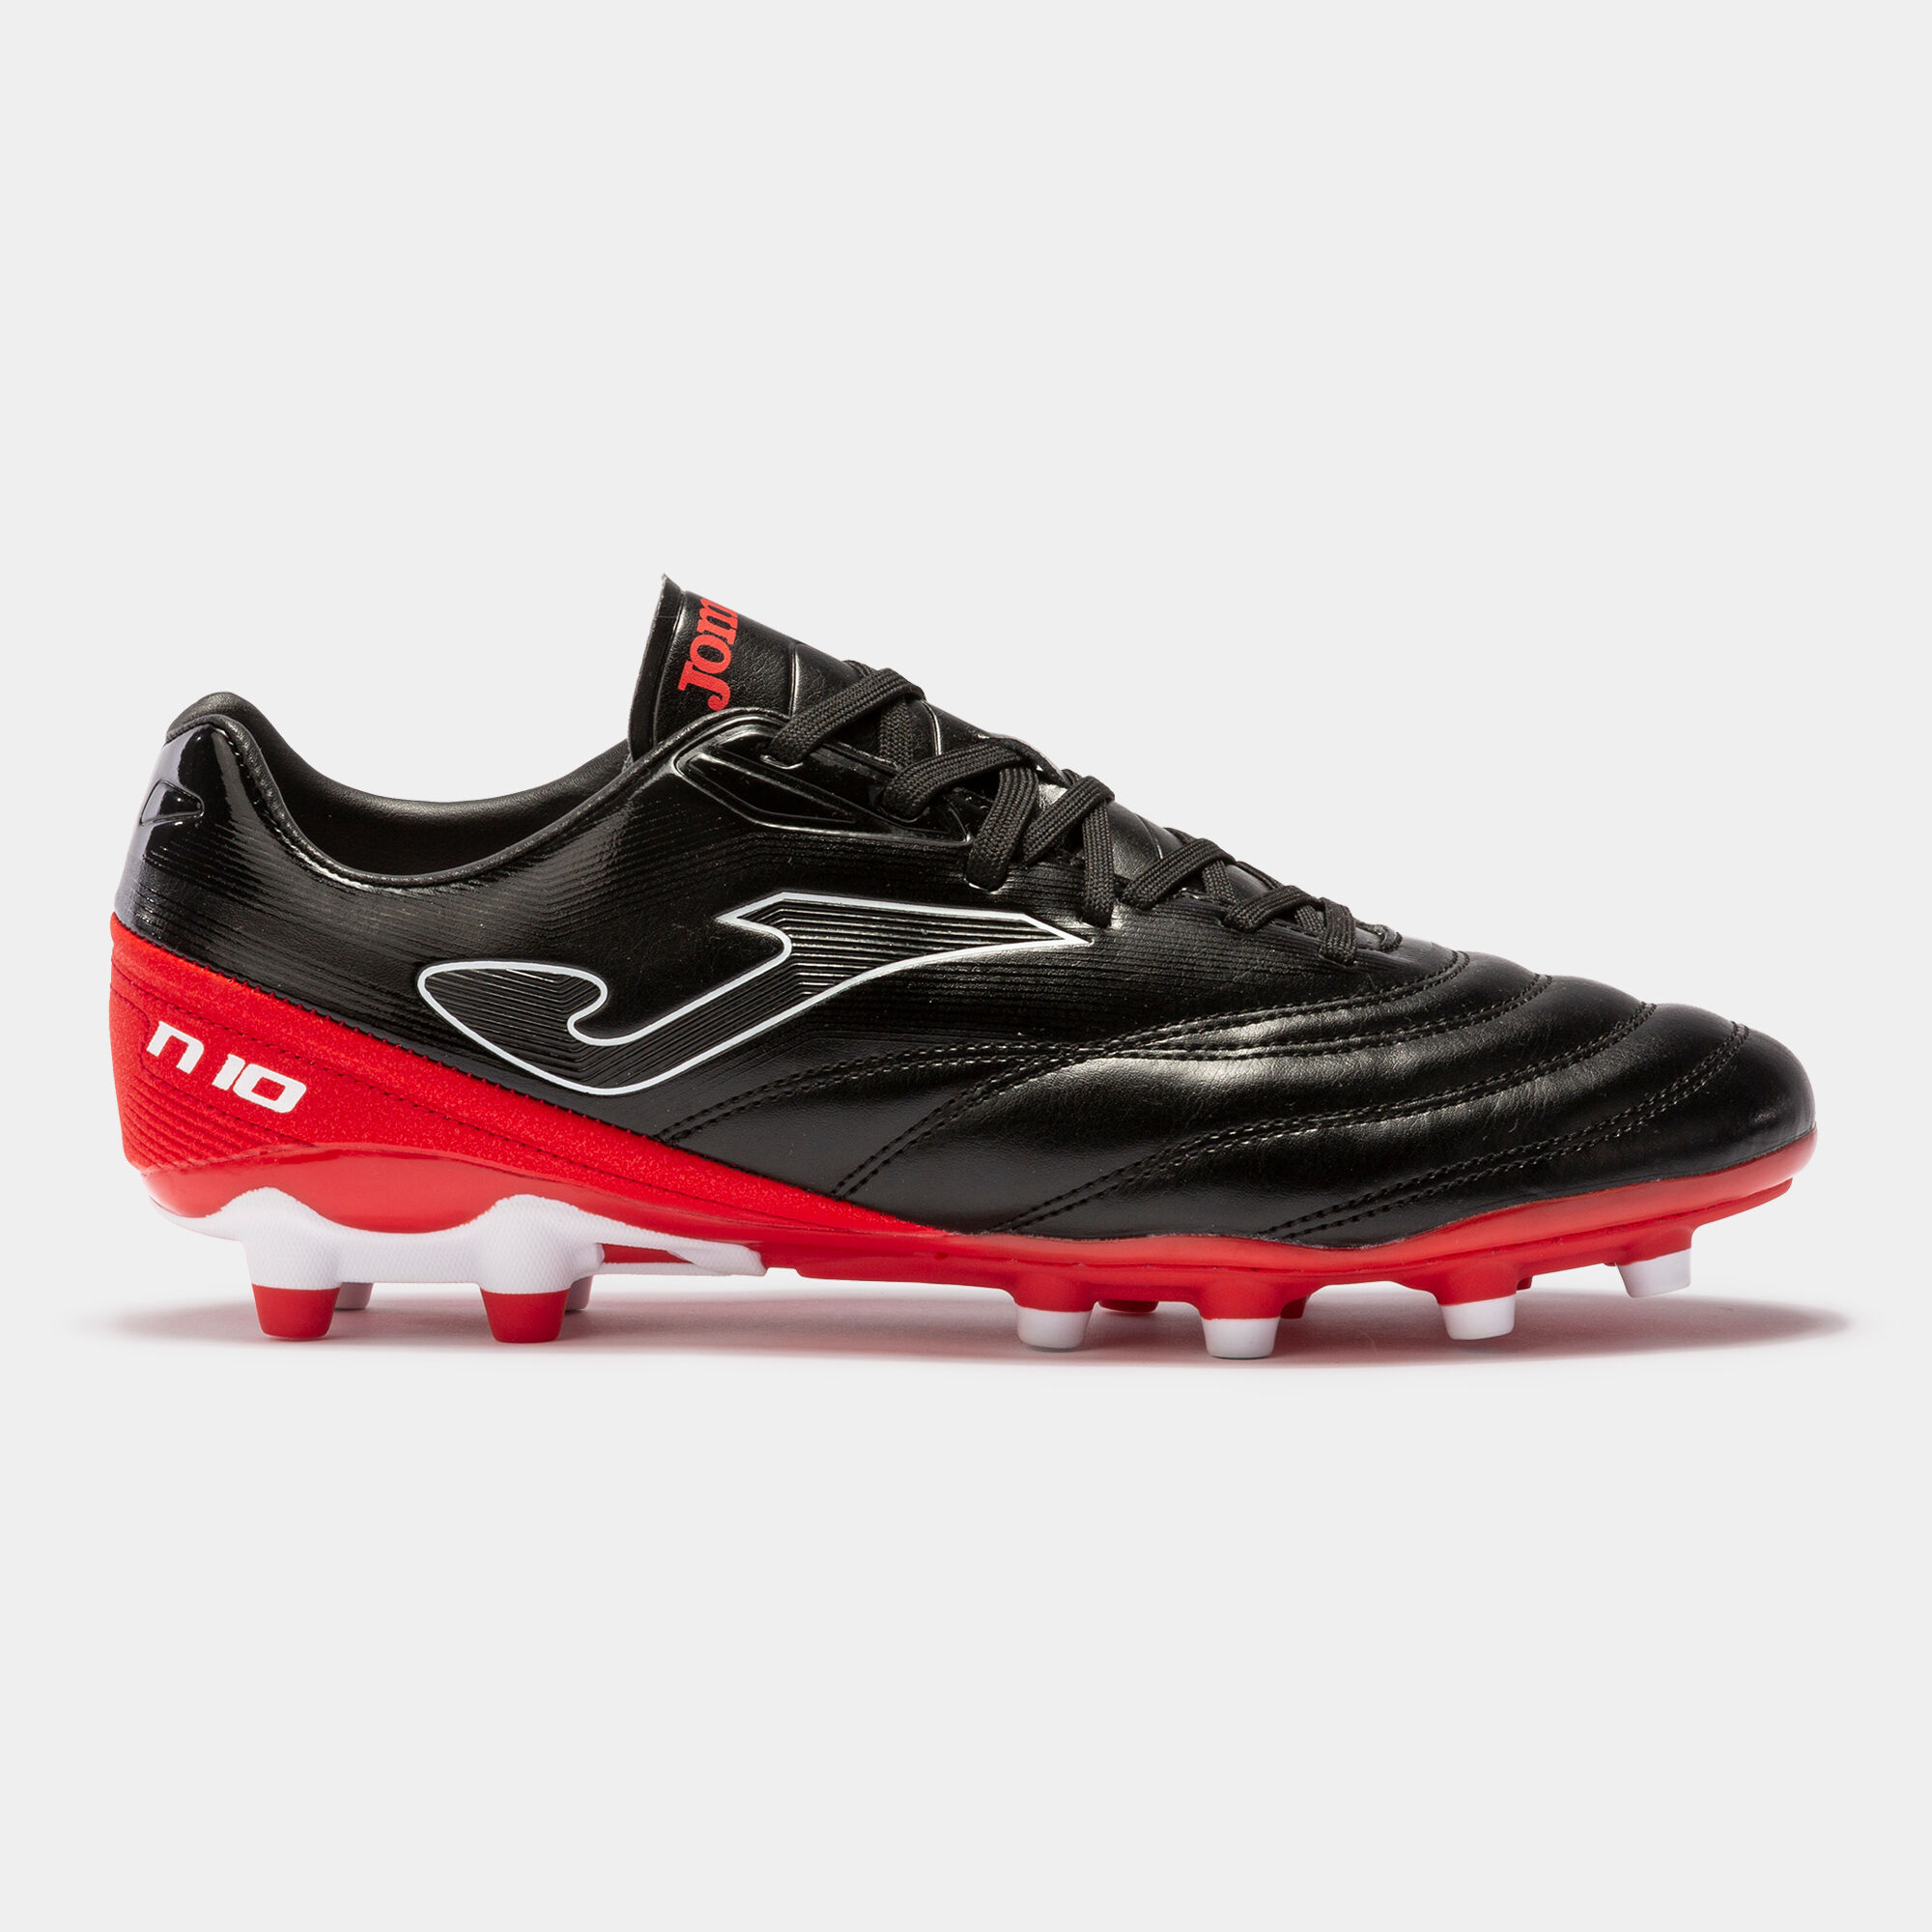 FOOTBALL BOOTS N-10 22 FIRM GROUND FG BLACK RED